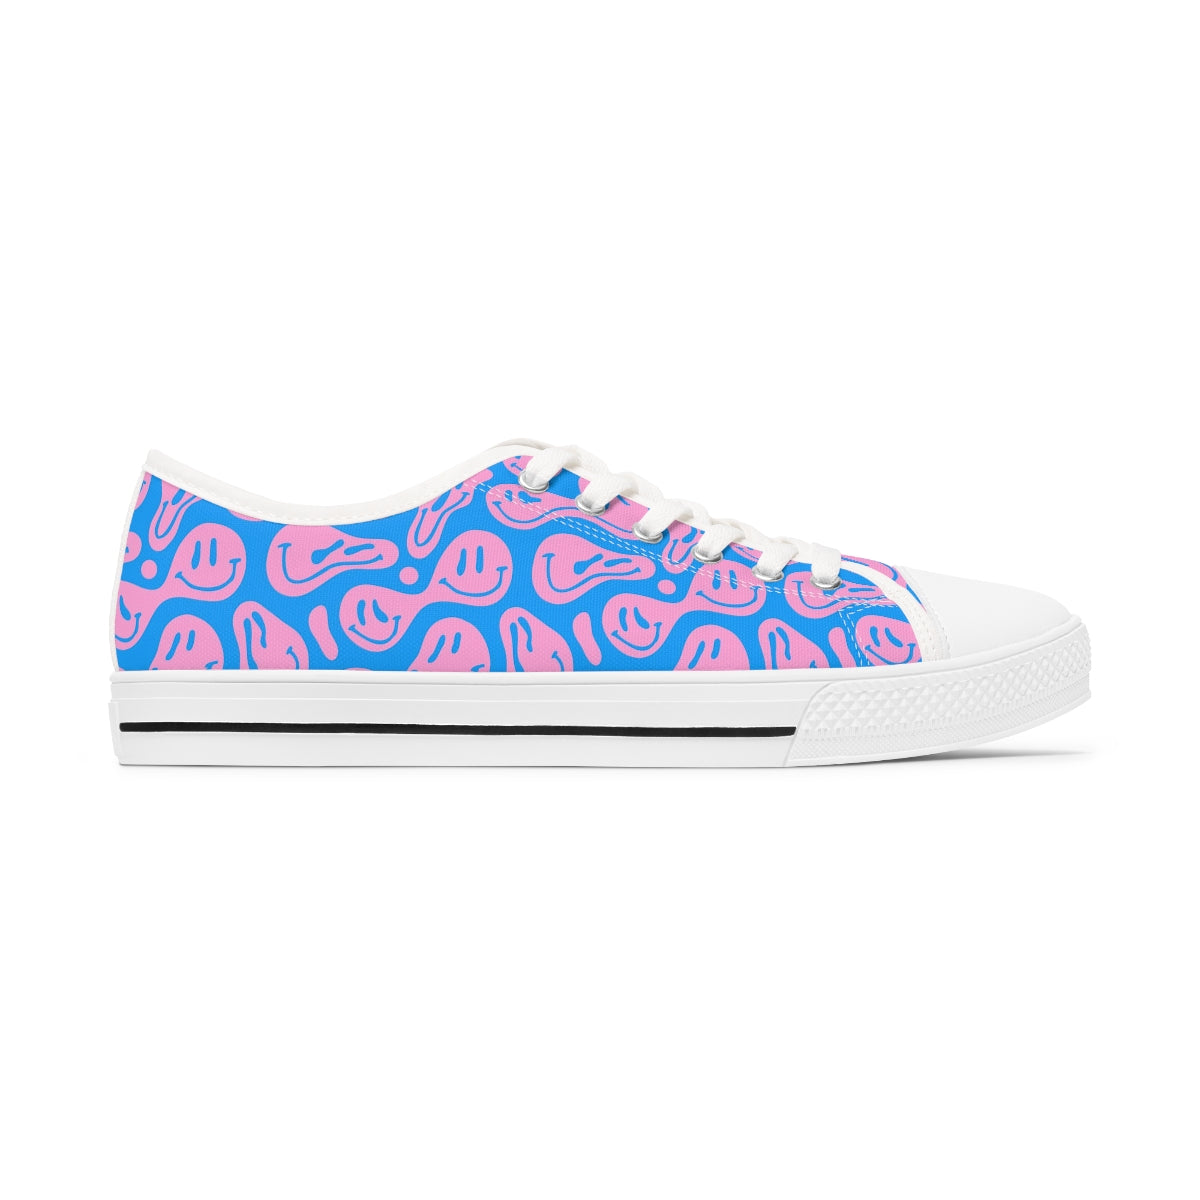 Melting Acid Faces  - Women's Low Top Sneakers ( Black or White Sole )